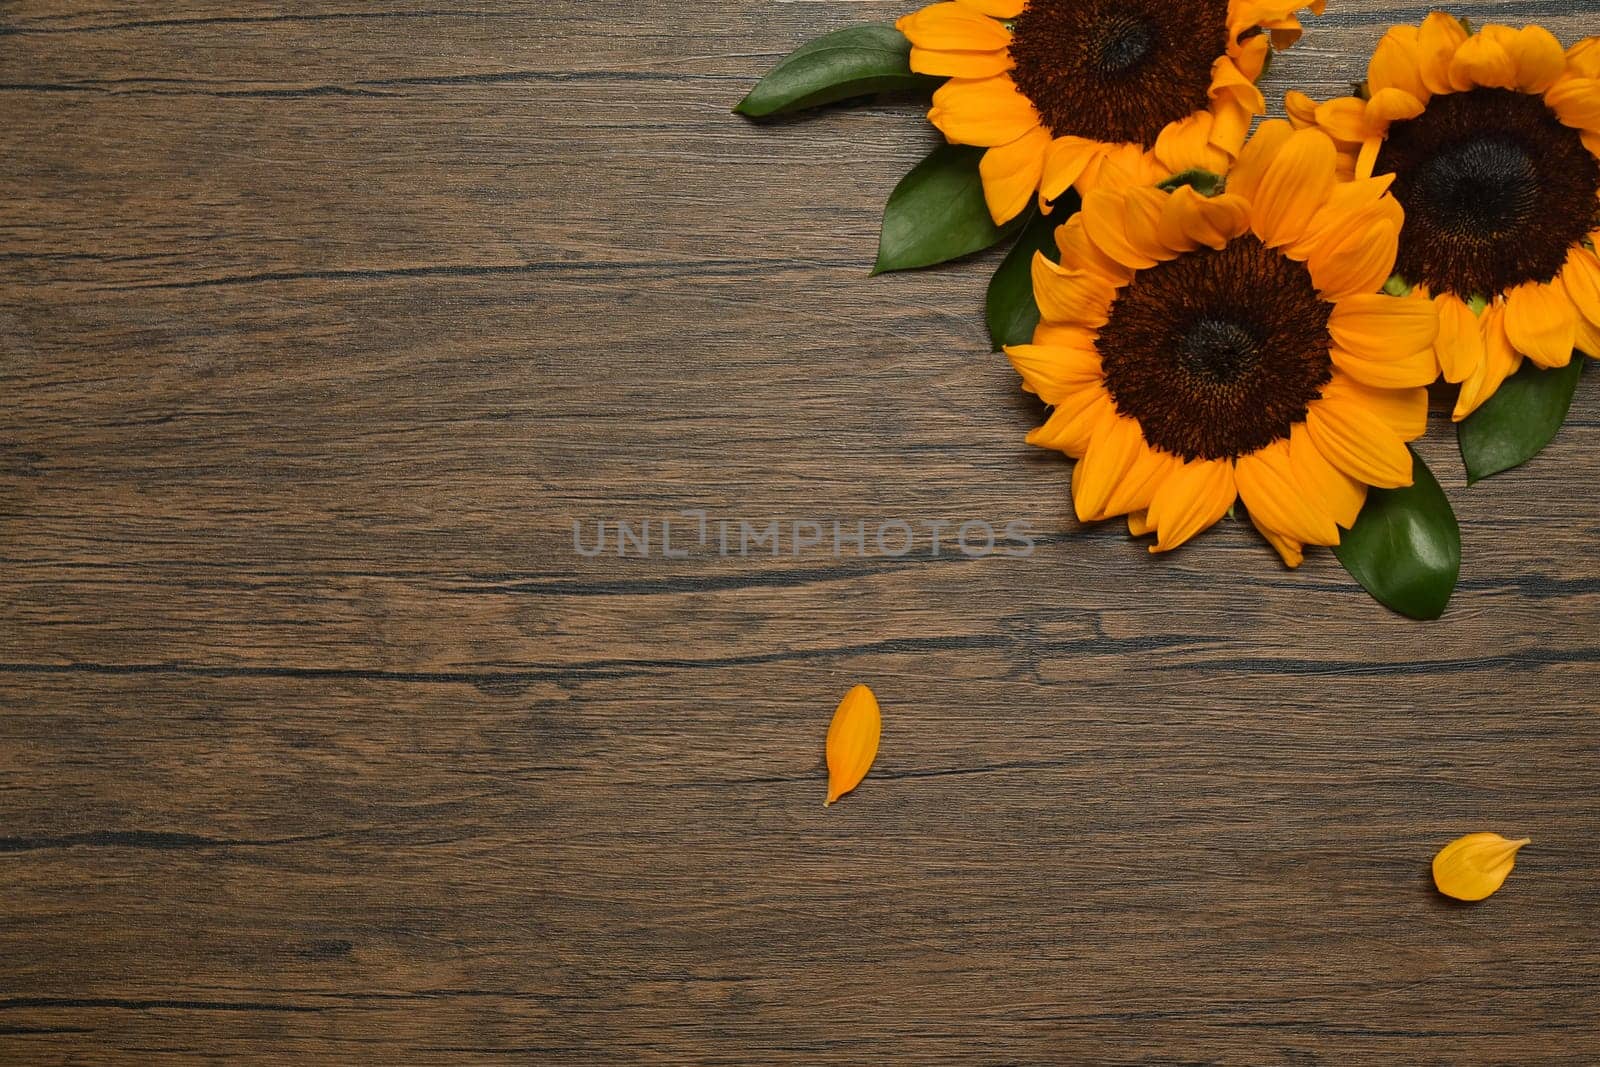 Sunflowers on rustic wooden background. Top view with copy space, floral background by prathanchorruangsak